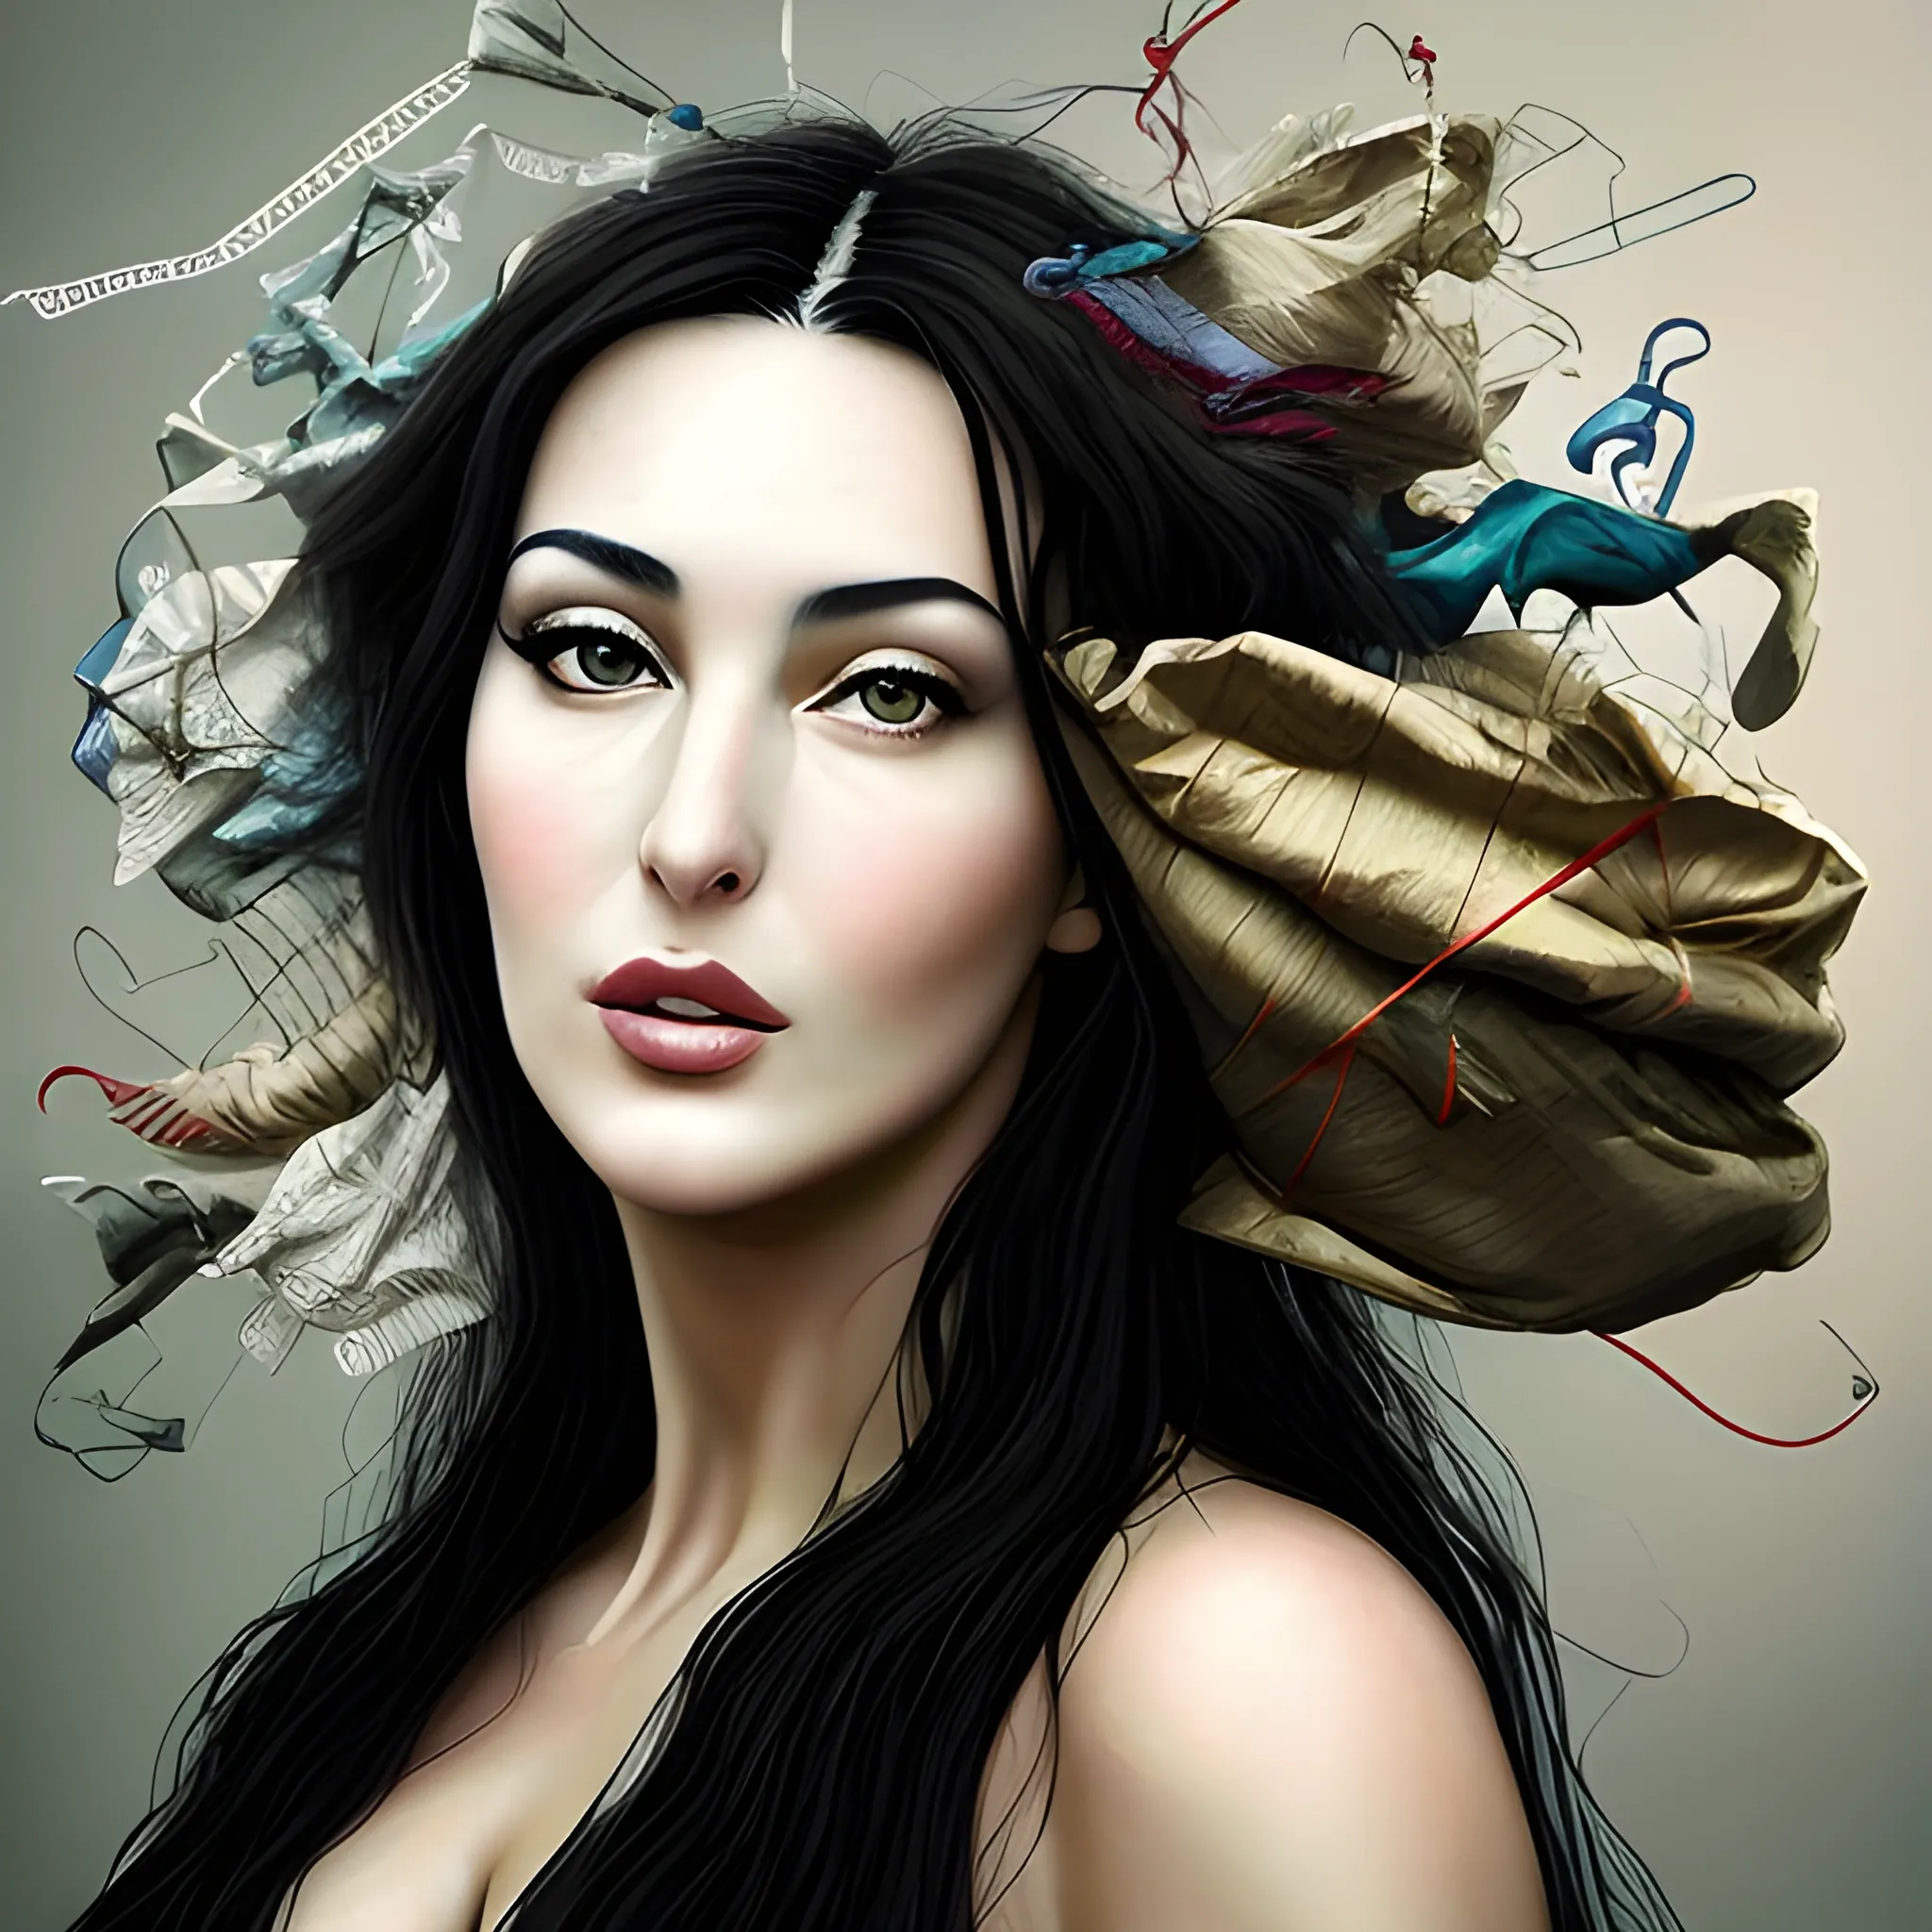 realistic portrait of a 25-year-old woman similar to Monica Bellucci, (((I give full freedom of creativity and imagination )))the result should be unreal - masterpiece and incredibly exciting and beautiful